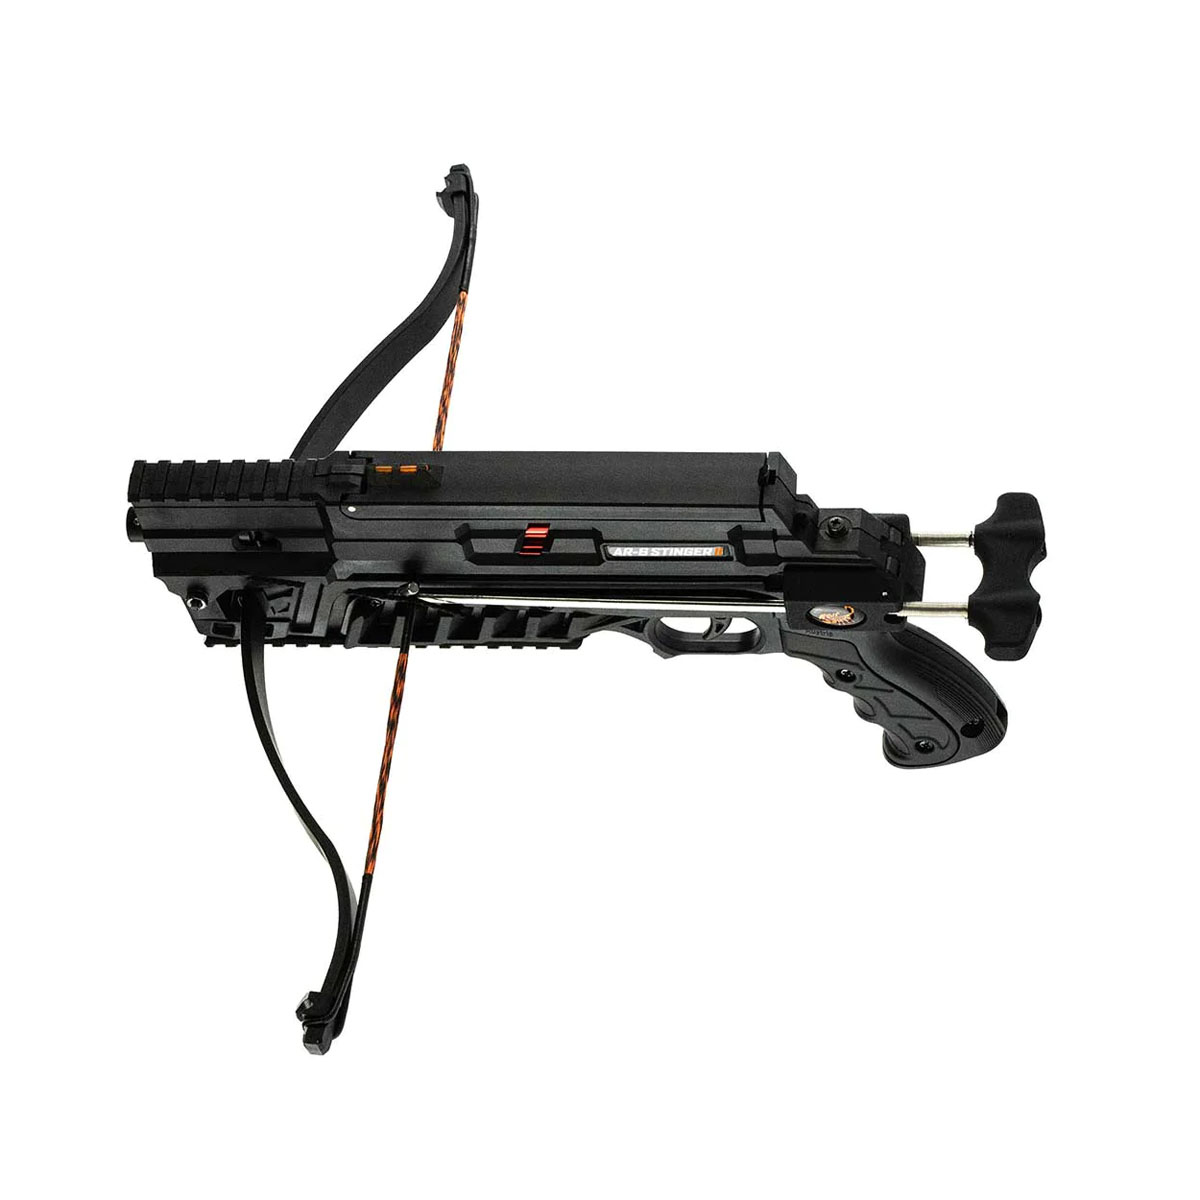 Steambow AR-6 Stinger II Compact Pistol Crossbow